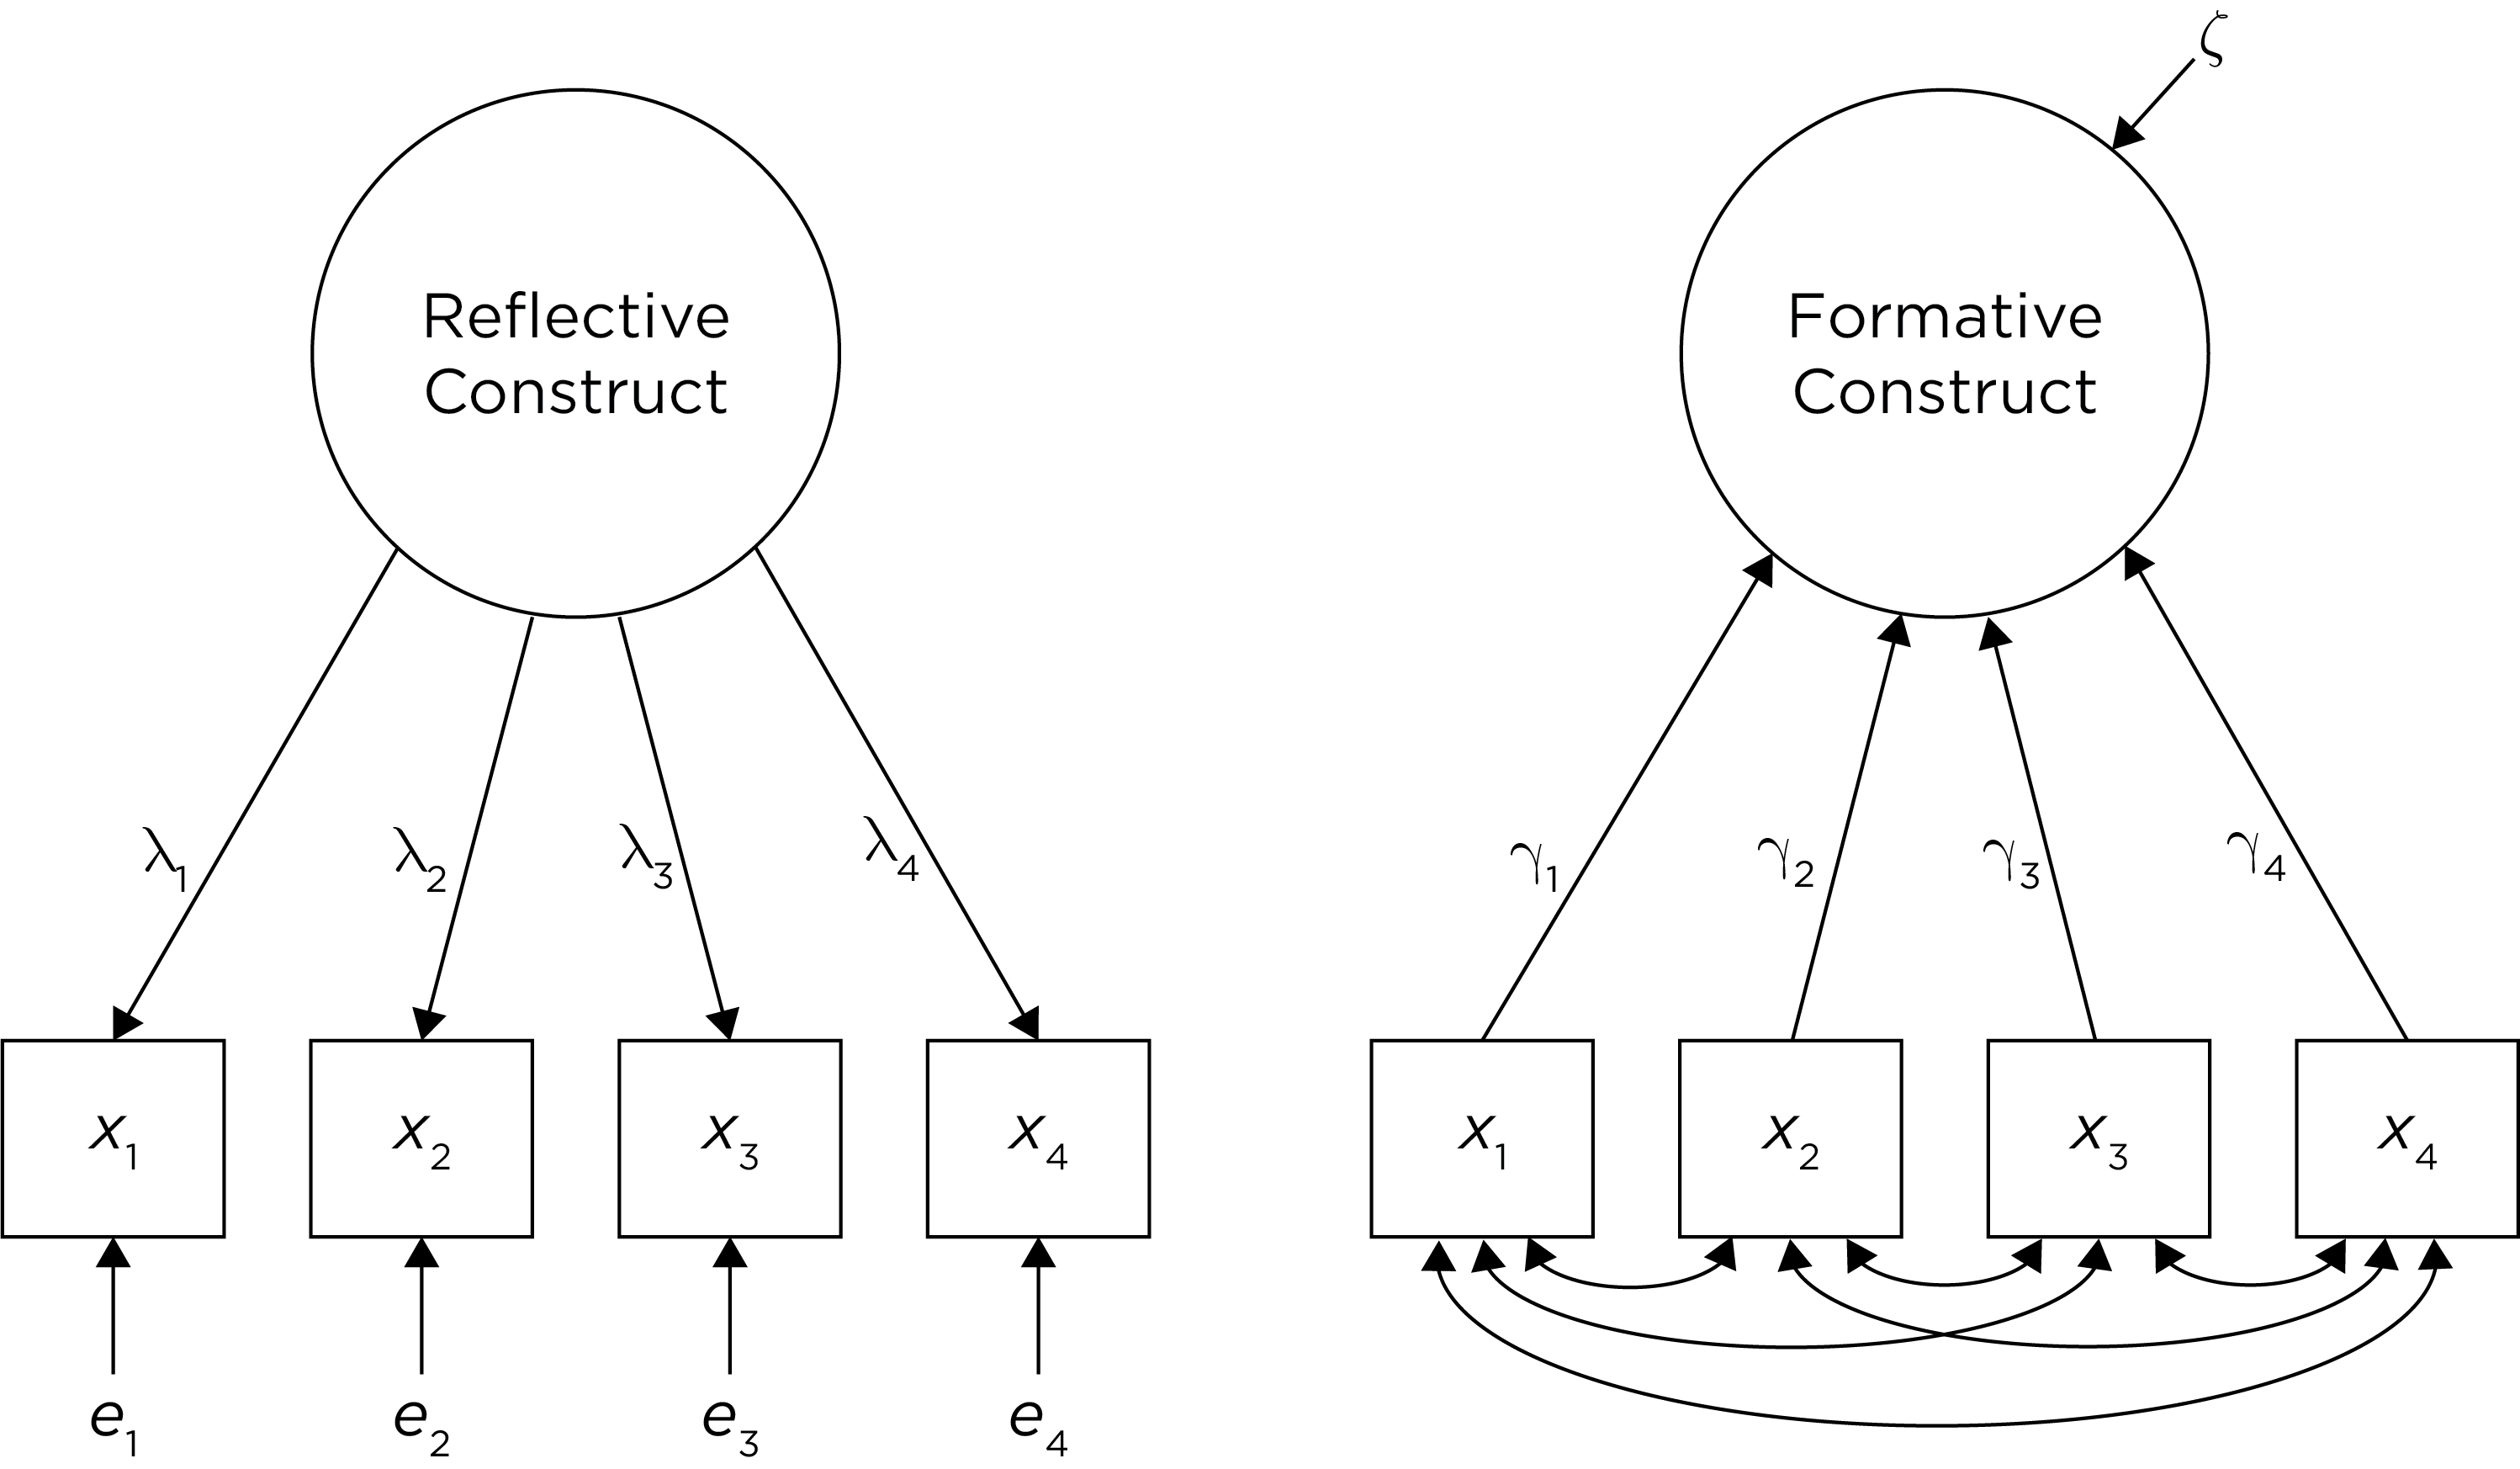 Reflective and Formative Constructs in Structural Equation Modeling.